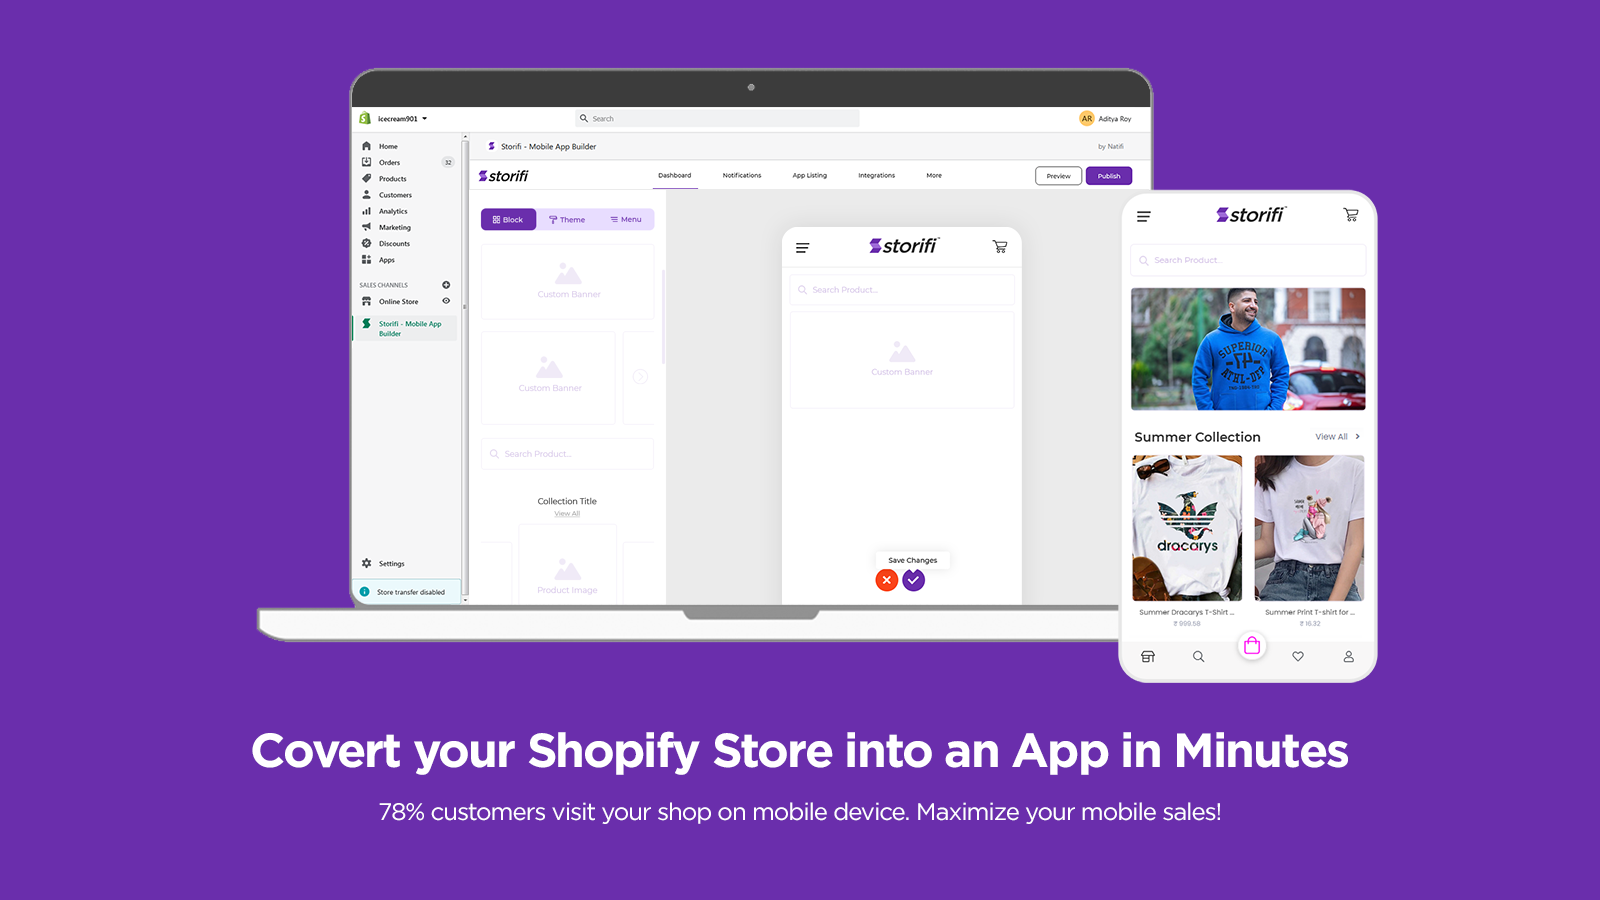 Convert your Shopify Store into App in Minutes with Storifi